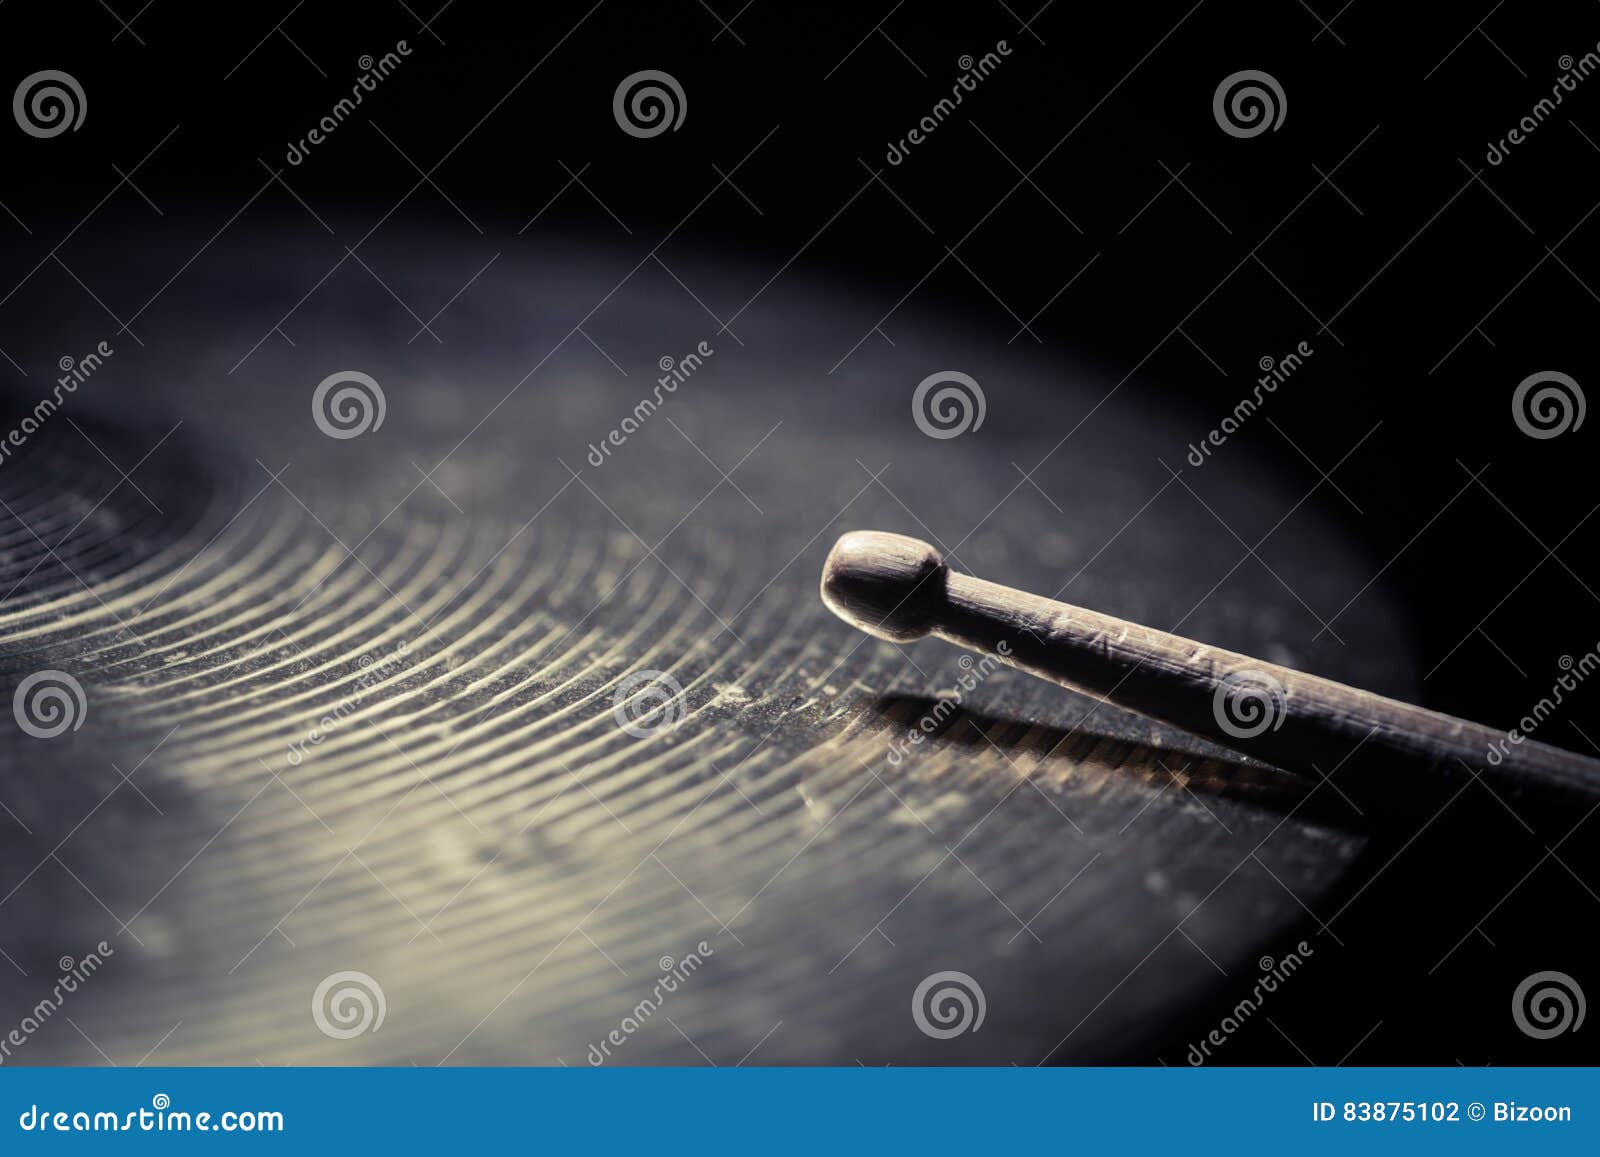 drum stick and cymbal detail